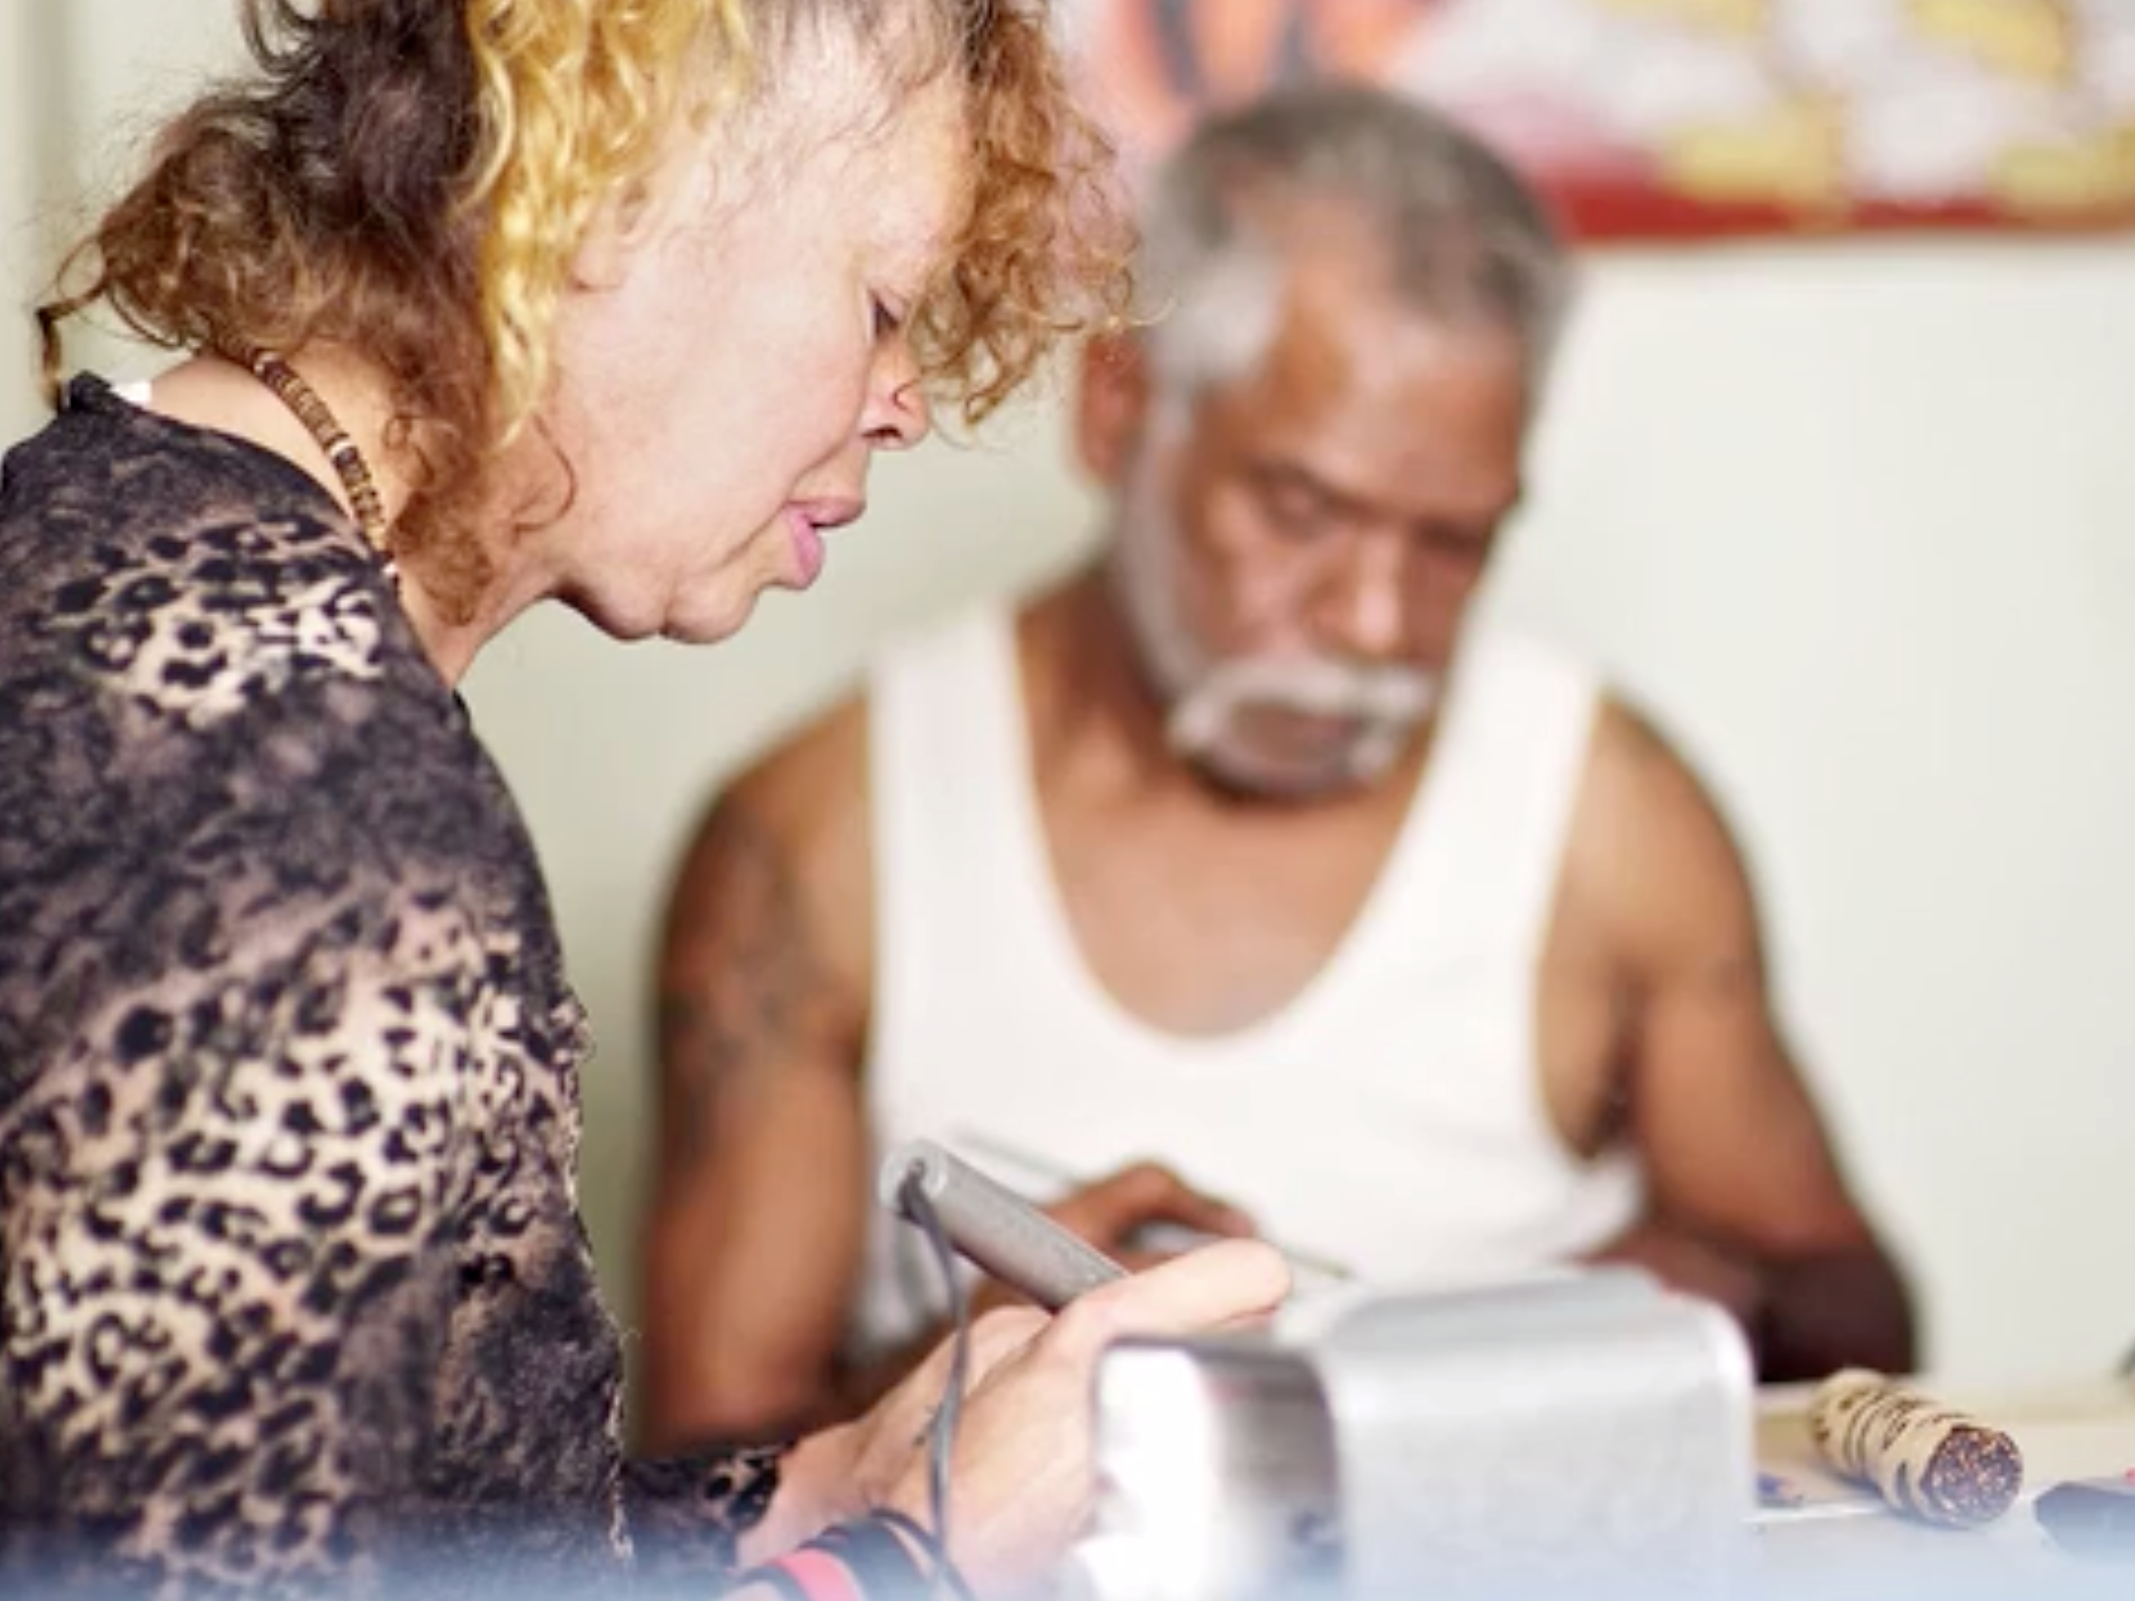 Two people, looking down towards a table where they are creating art. One person is wearing a leopard print top, and the other is wearing a white singlet. 